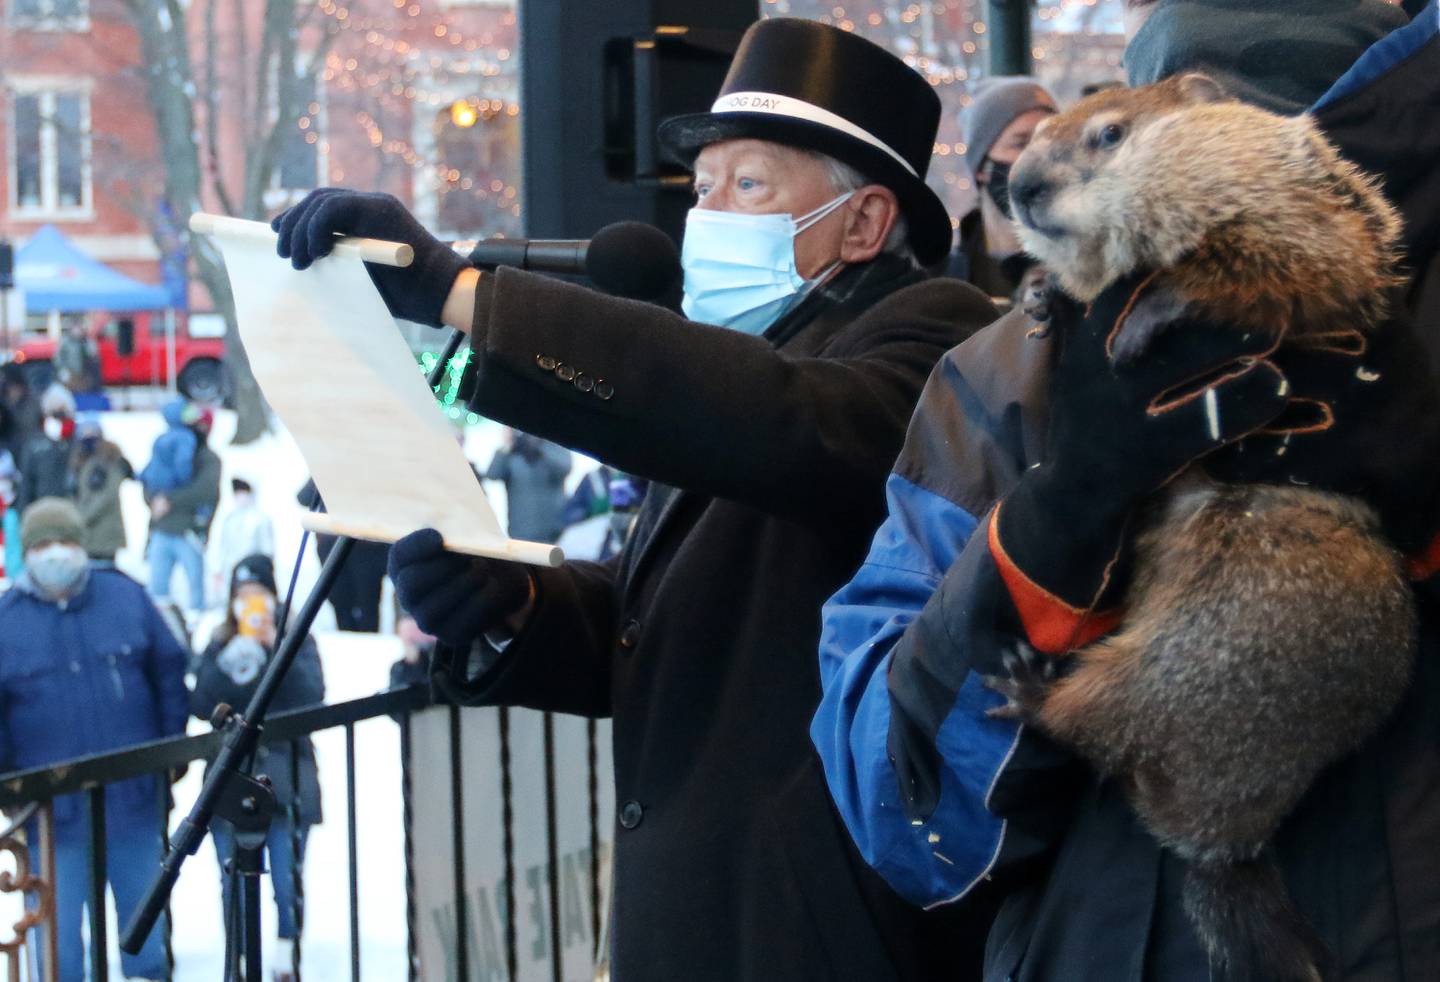 Former Mayor Brian Sager announces to the crowd that Woodstock Willie woke up and did not see his shadow, symbolizing an early spring, during the annual Woodstock Groundhog Days Prognostication on the historic Woodstock Square on Tuesday, Feb. 2, 2021, in Woodstock.